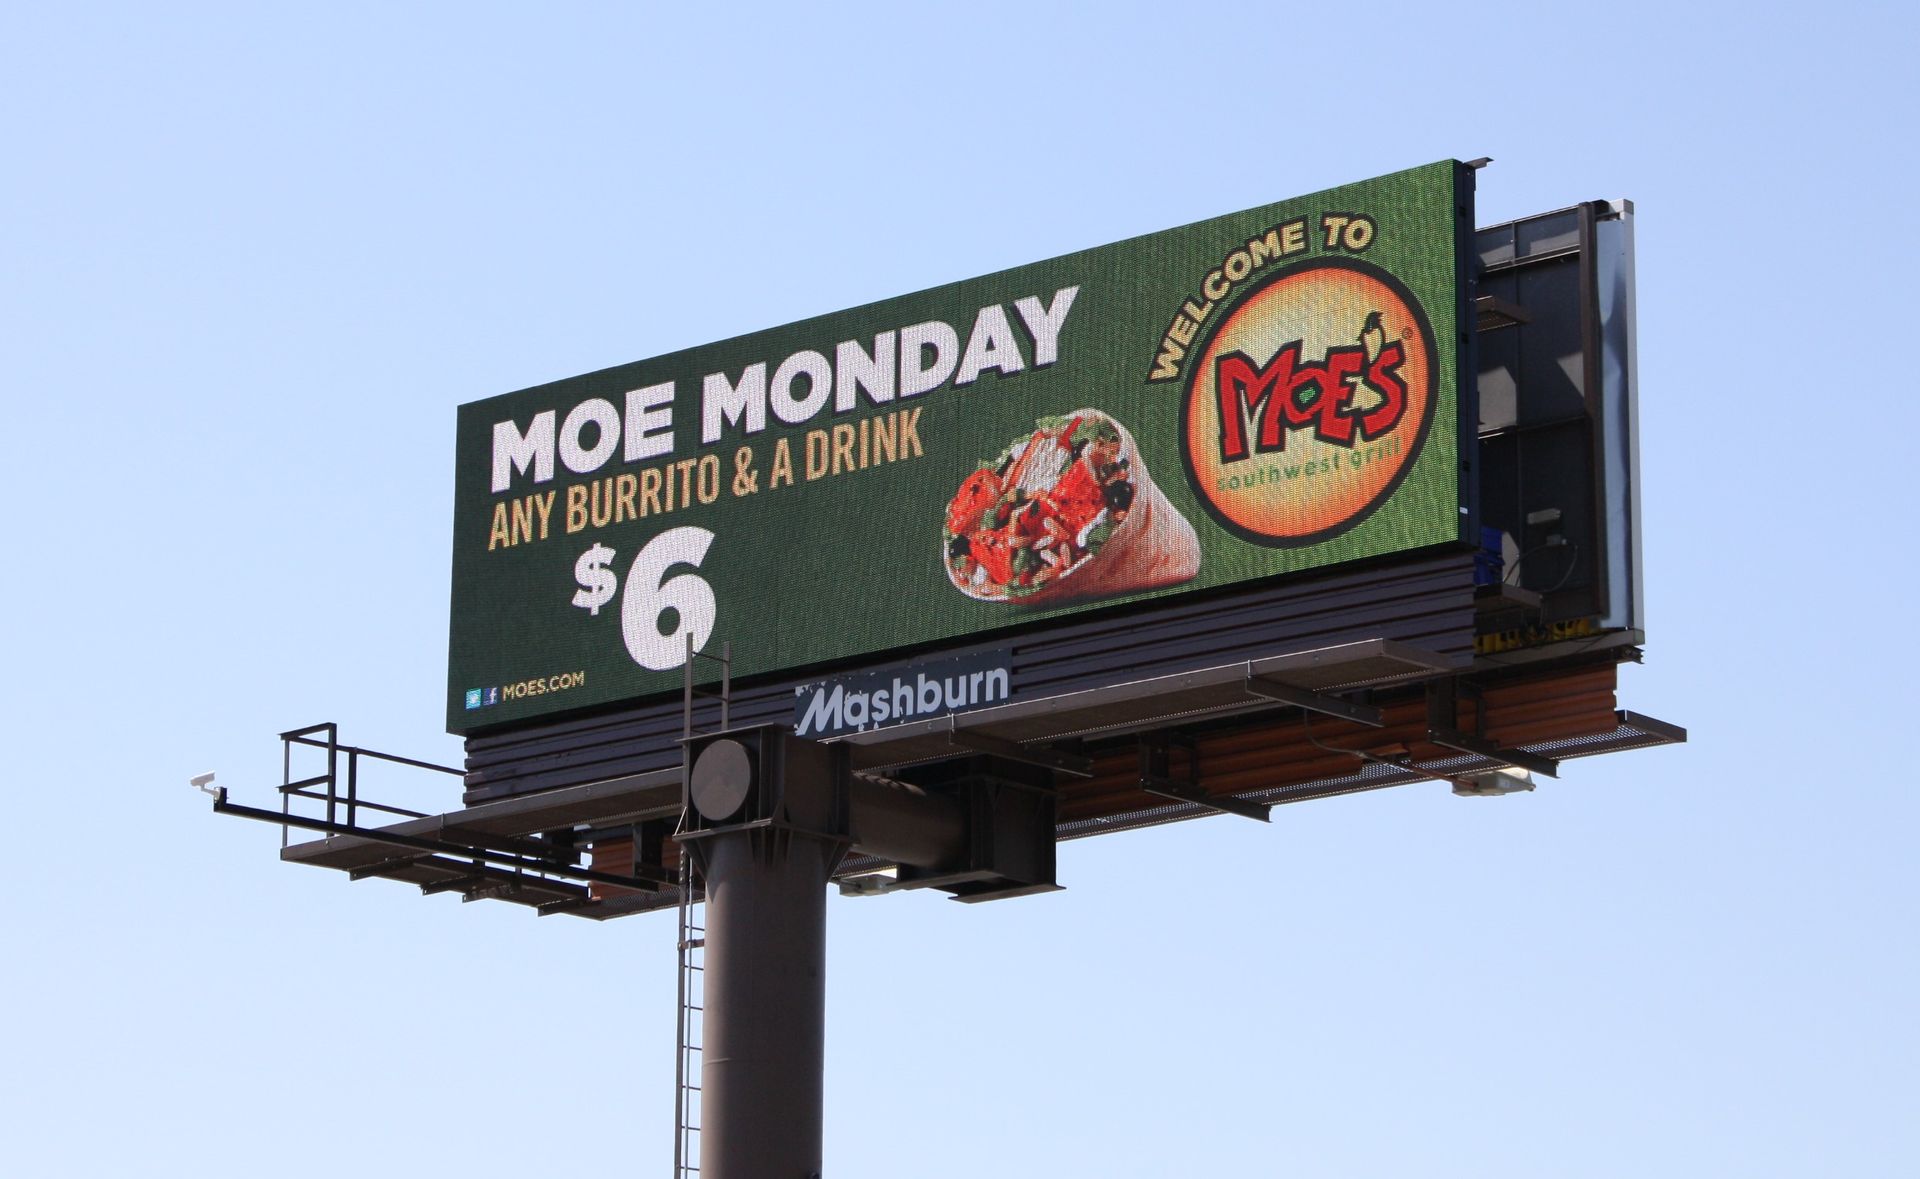 a billboard that says moe monday on it